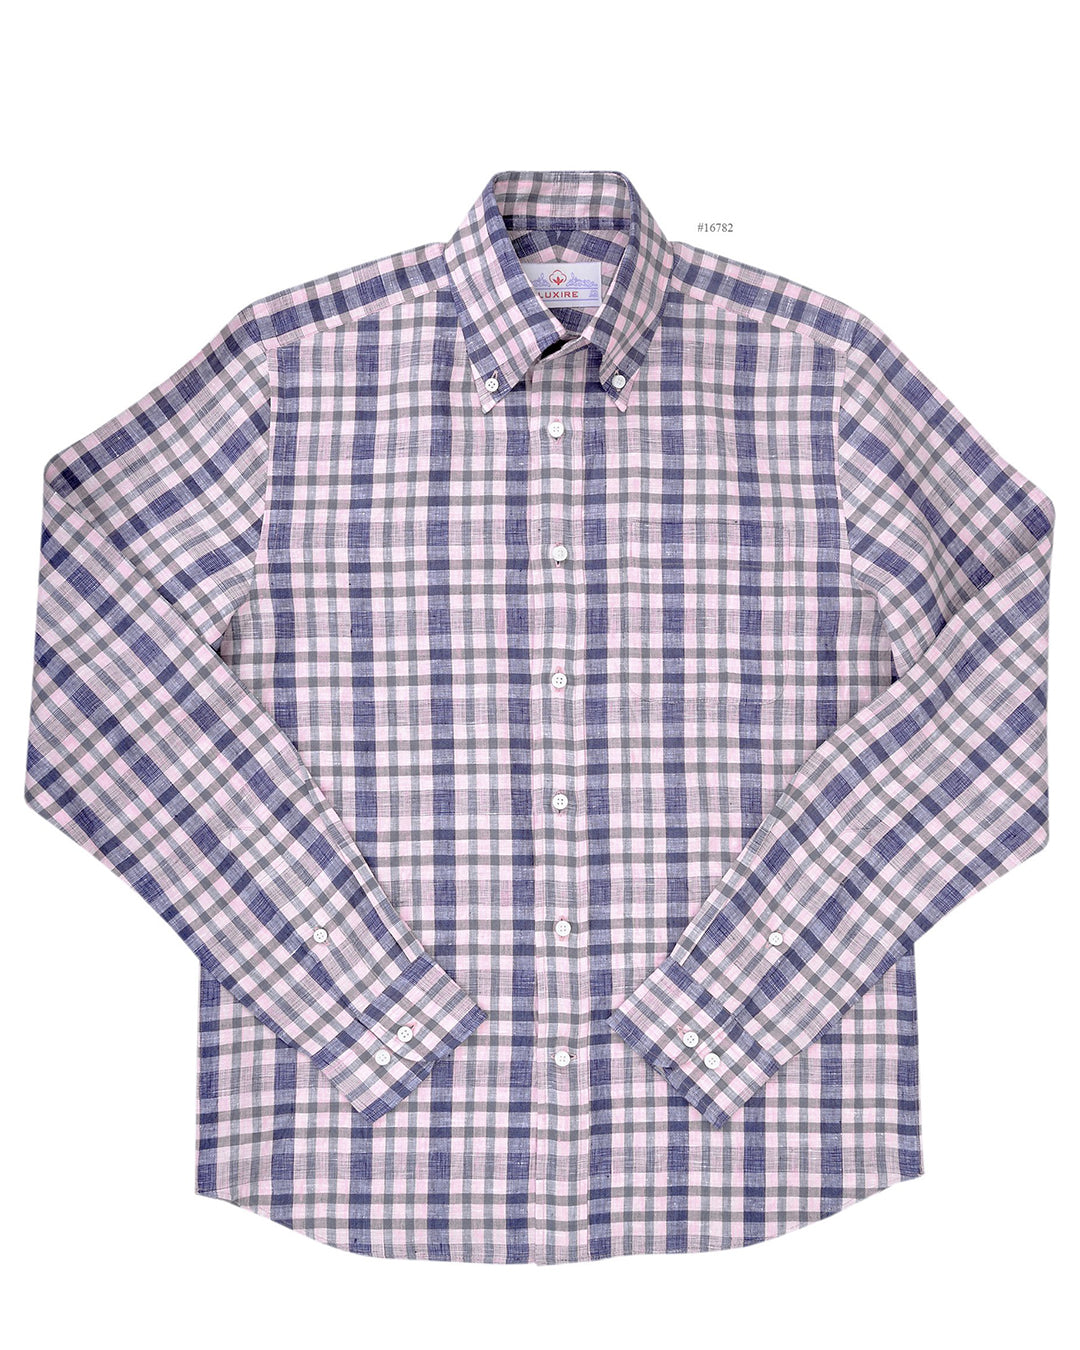 Front view of custom linen shirt for men by Luxire in pink and navy checkered